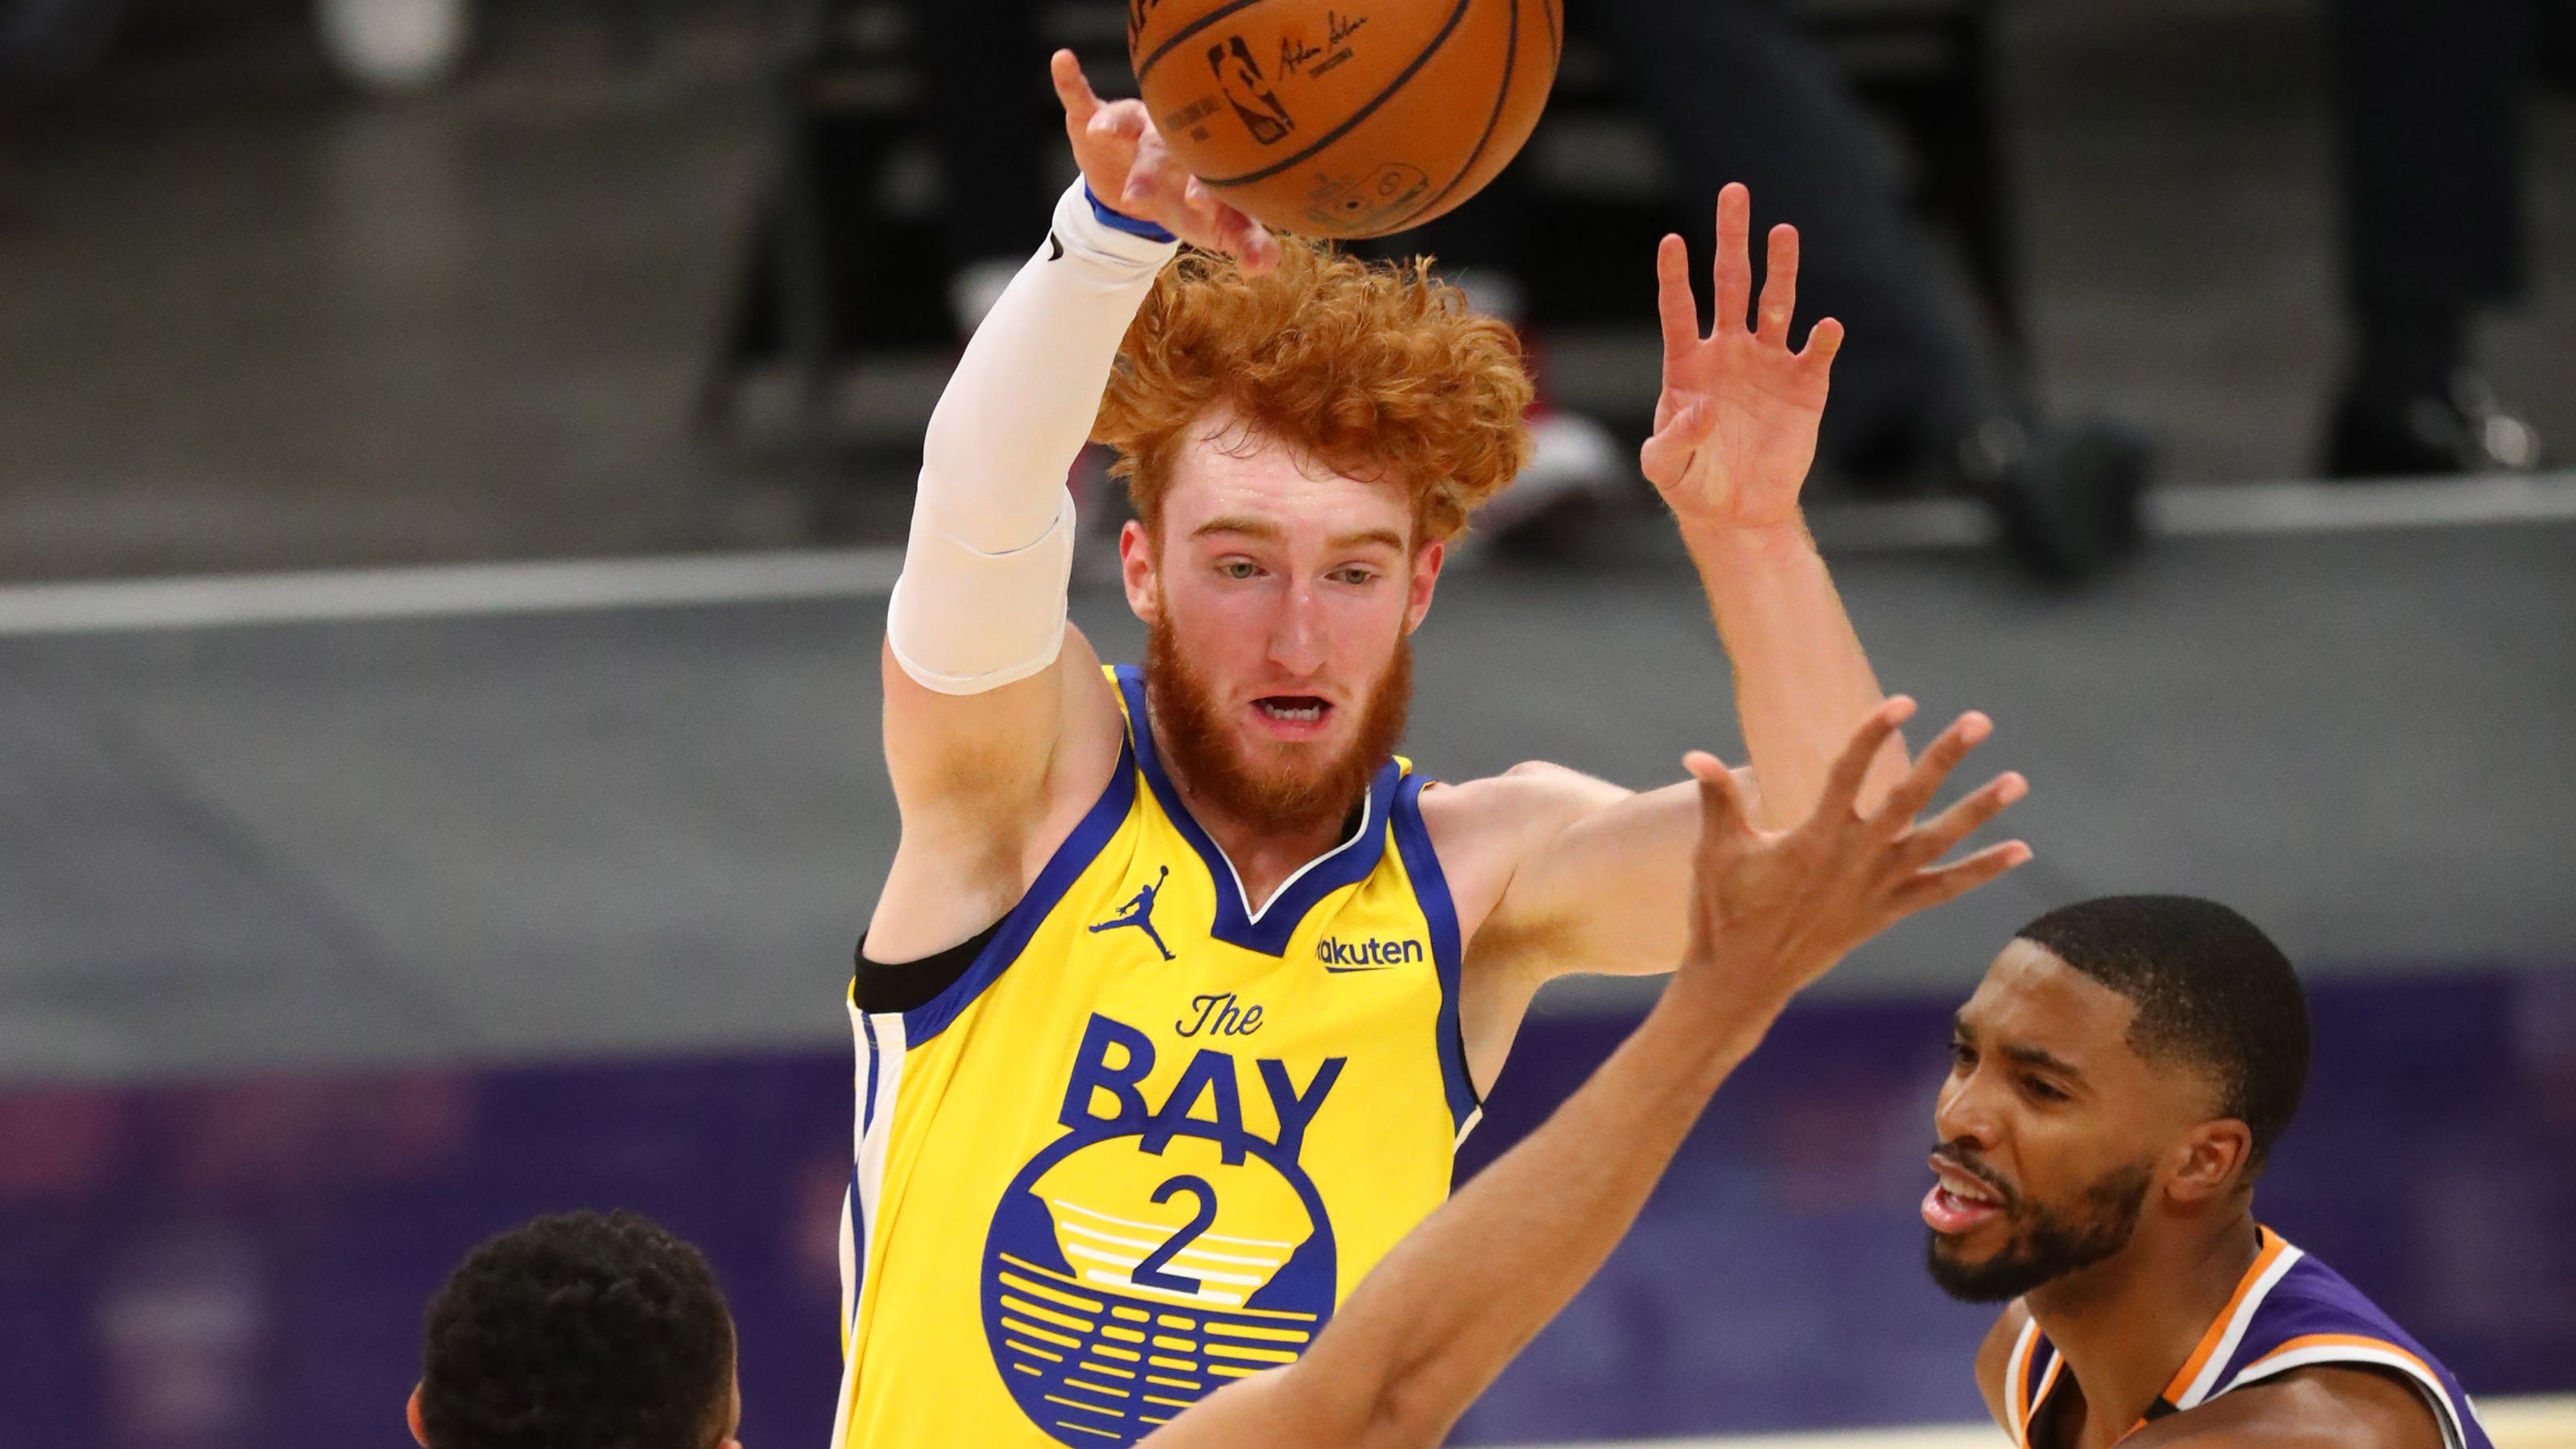 No fear: Golden State Warriors rookie Nico Mannion holds his own in first N...